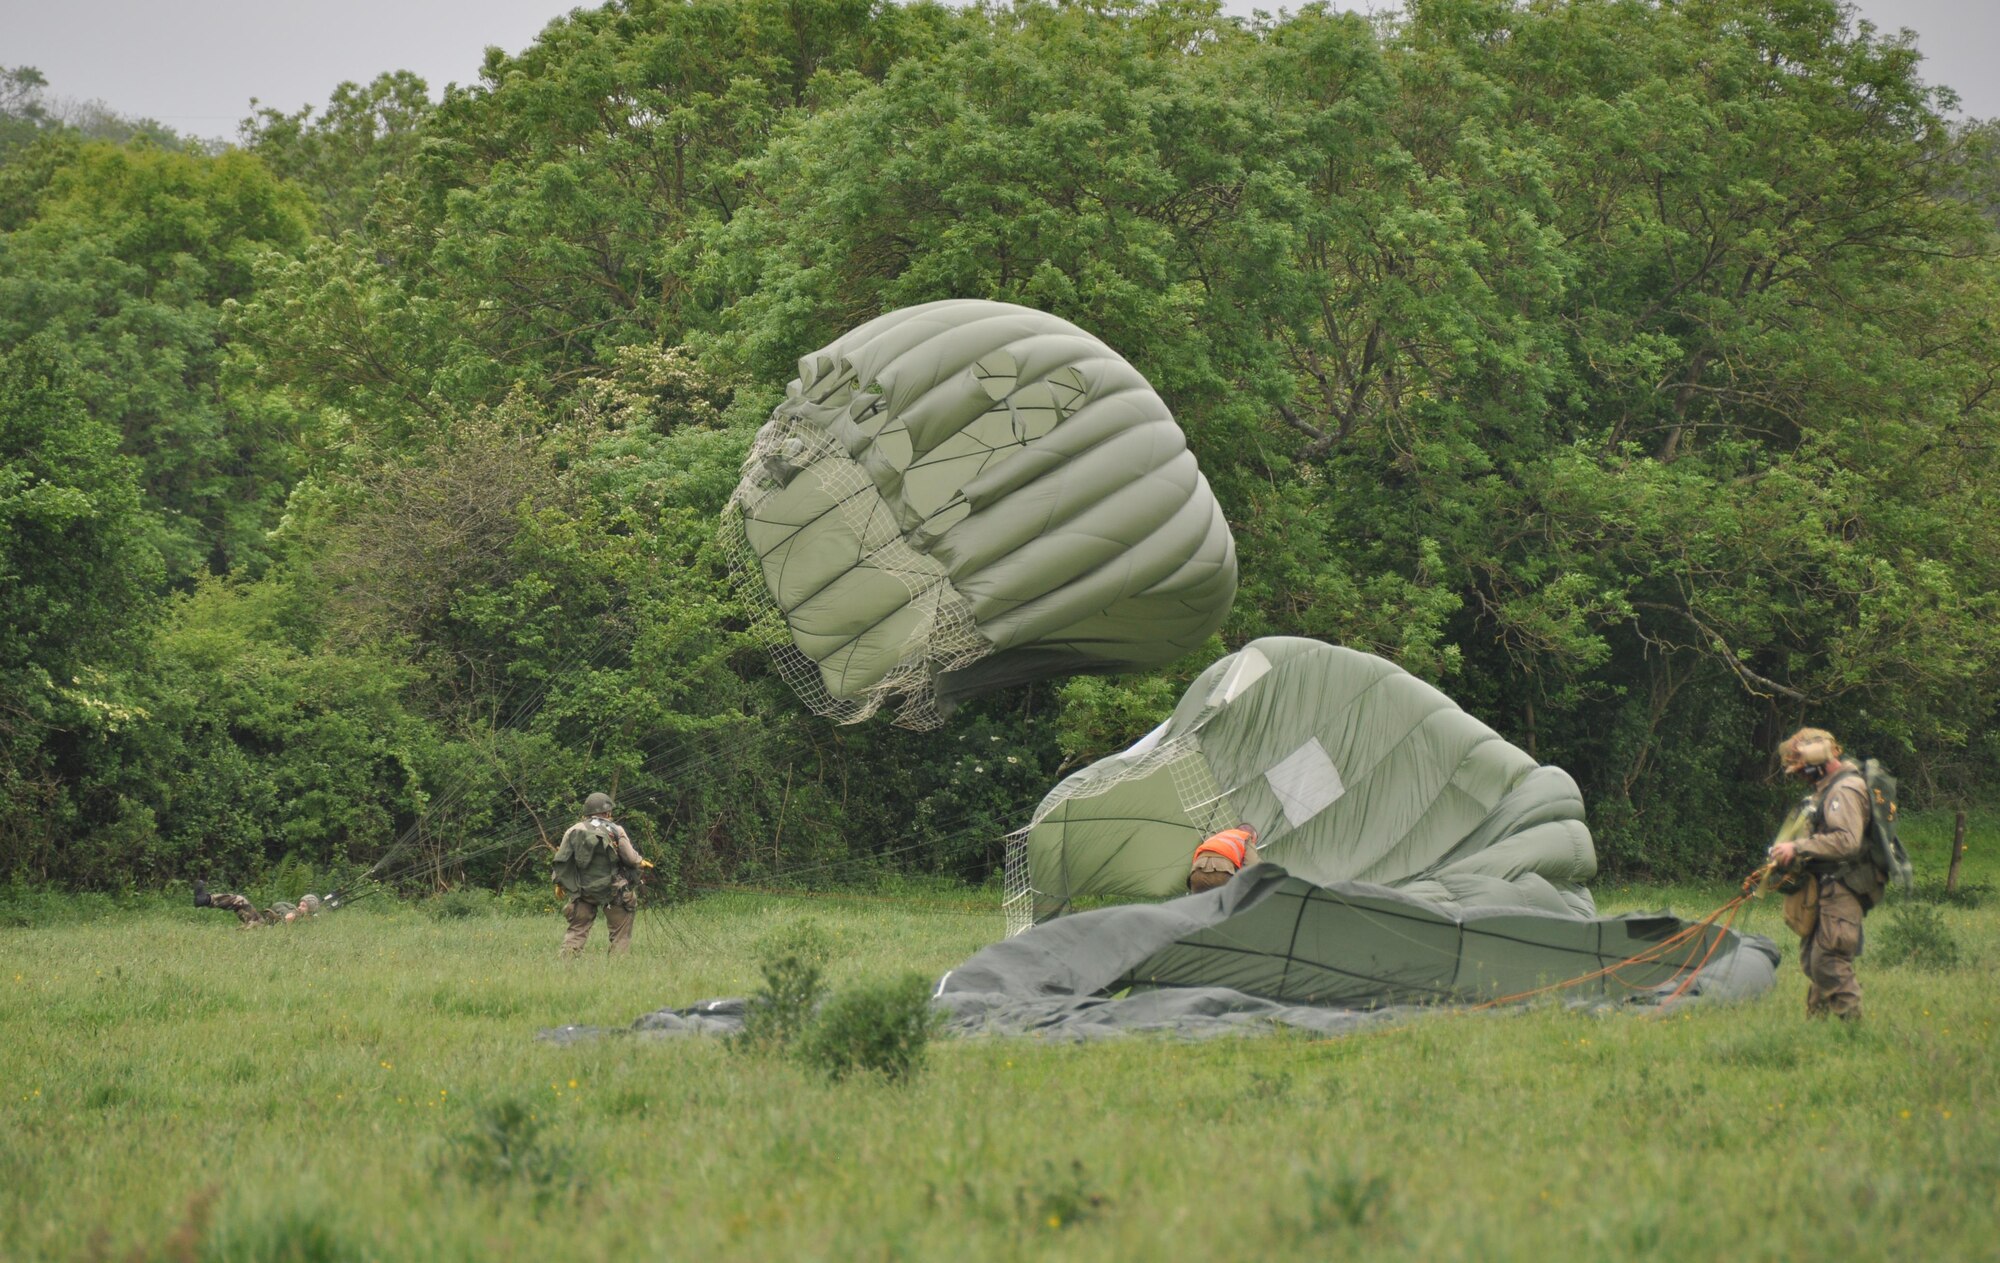 Members of the Round Canopy Parachuting Team, dressed in D-Day period costumes, parachuted into Fresville, France June 2, 2016 during an exhibition jump.  The Round Canopy Parachuting Team invited members of the 815th Airlift Squadron to assist in the drop zone.  More than 380 service members from Europe and affiliated D-Day historical units are participating in the 72nd anniversary as a part of Joint Task Force D-Day 72.  The Task Force, based in Sainte-Mère-Église, France, is supporting local events across Normandy, from May 30 - 6 June, 2016 to commemorate the selfless actions by all of the allies on D-Day that continue to resonate 72 years later.  (U.S. Air Force photo by Master Sgt. Jessica L. Kendziorek)